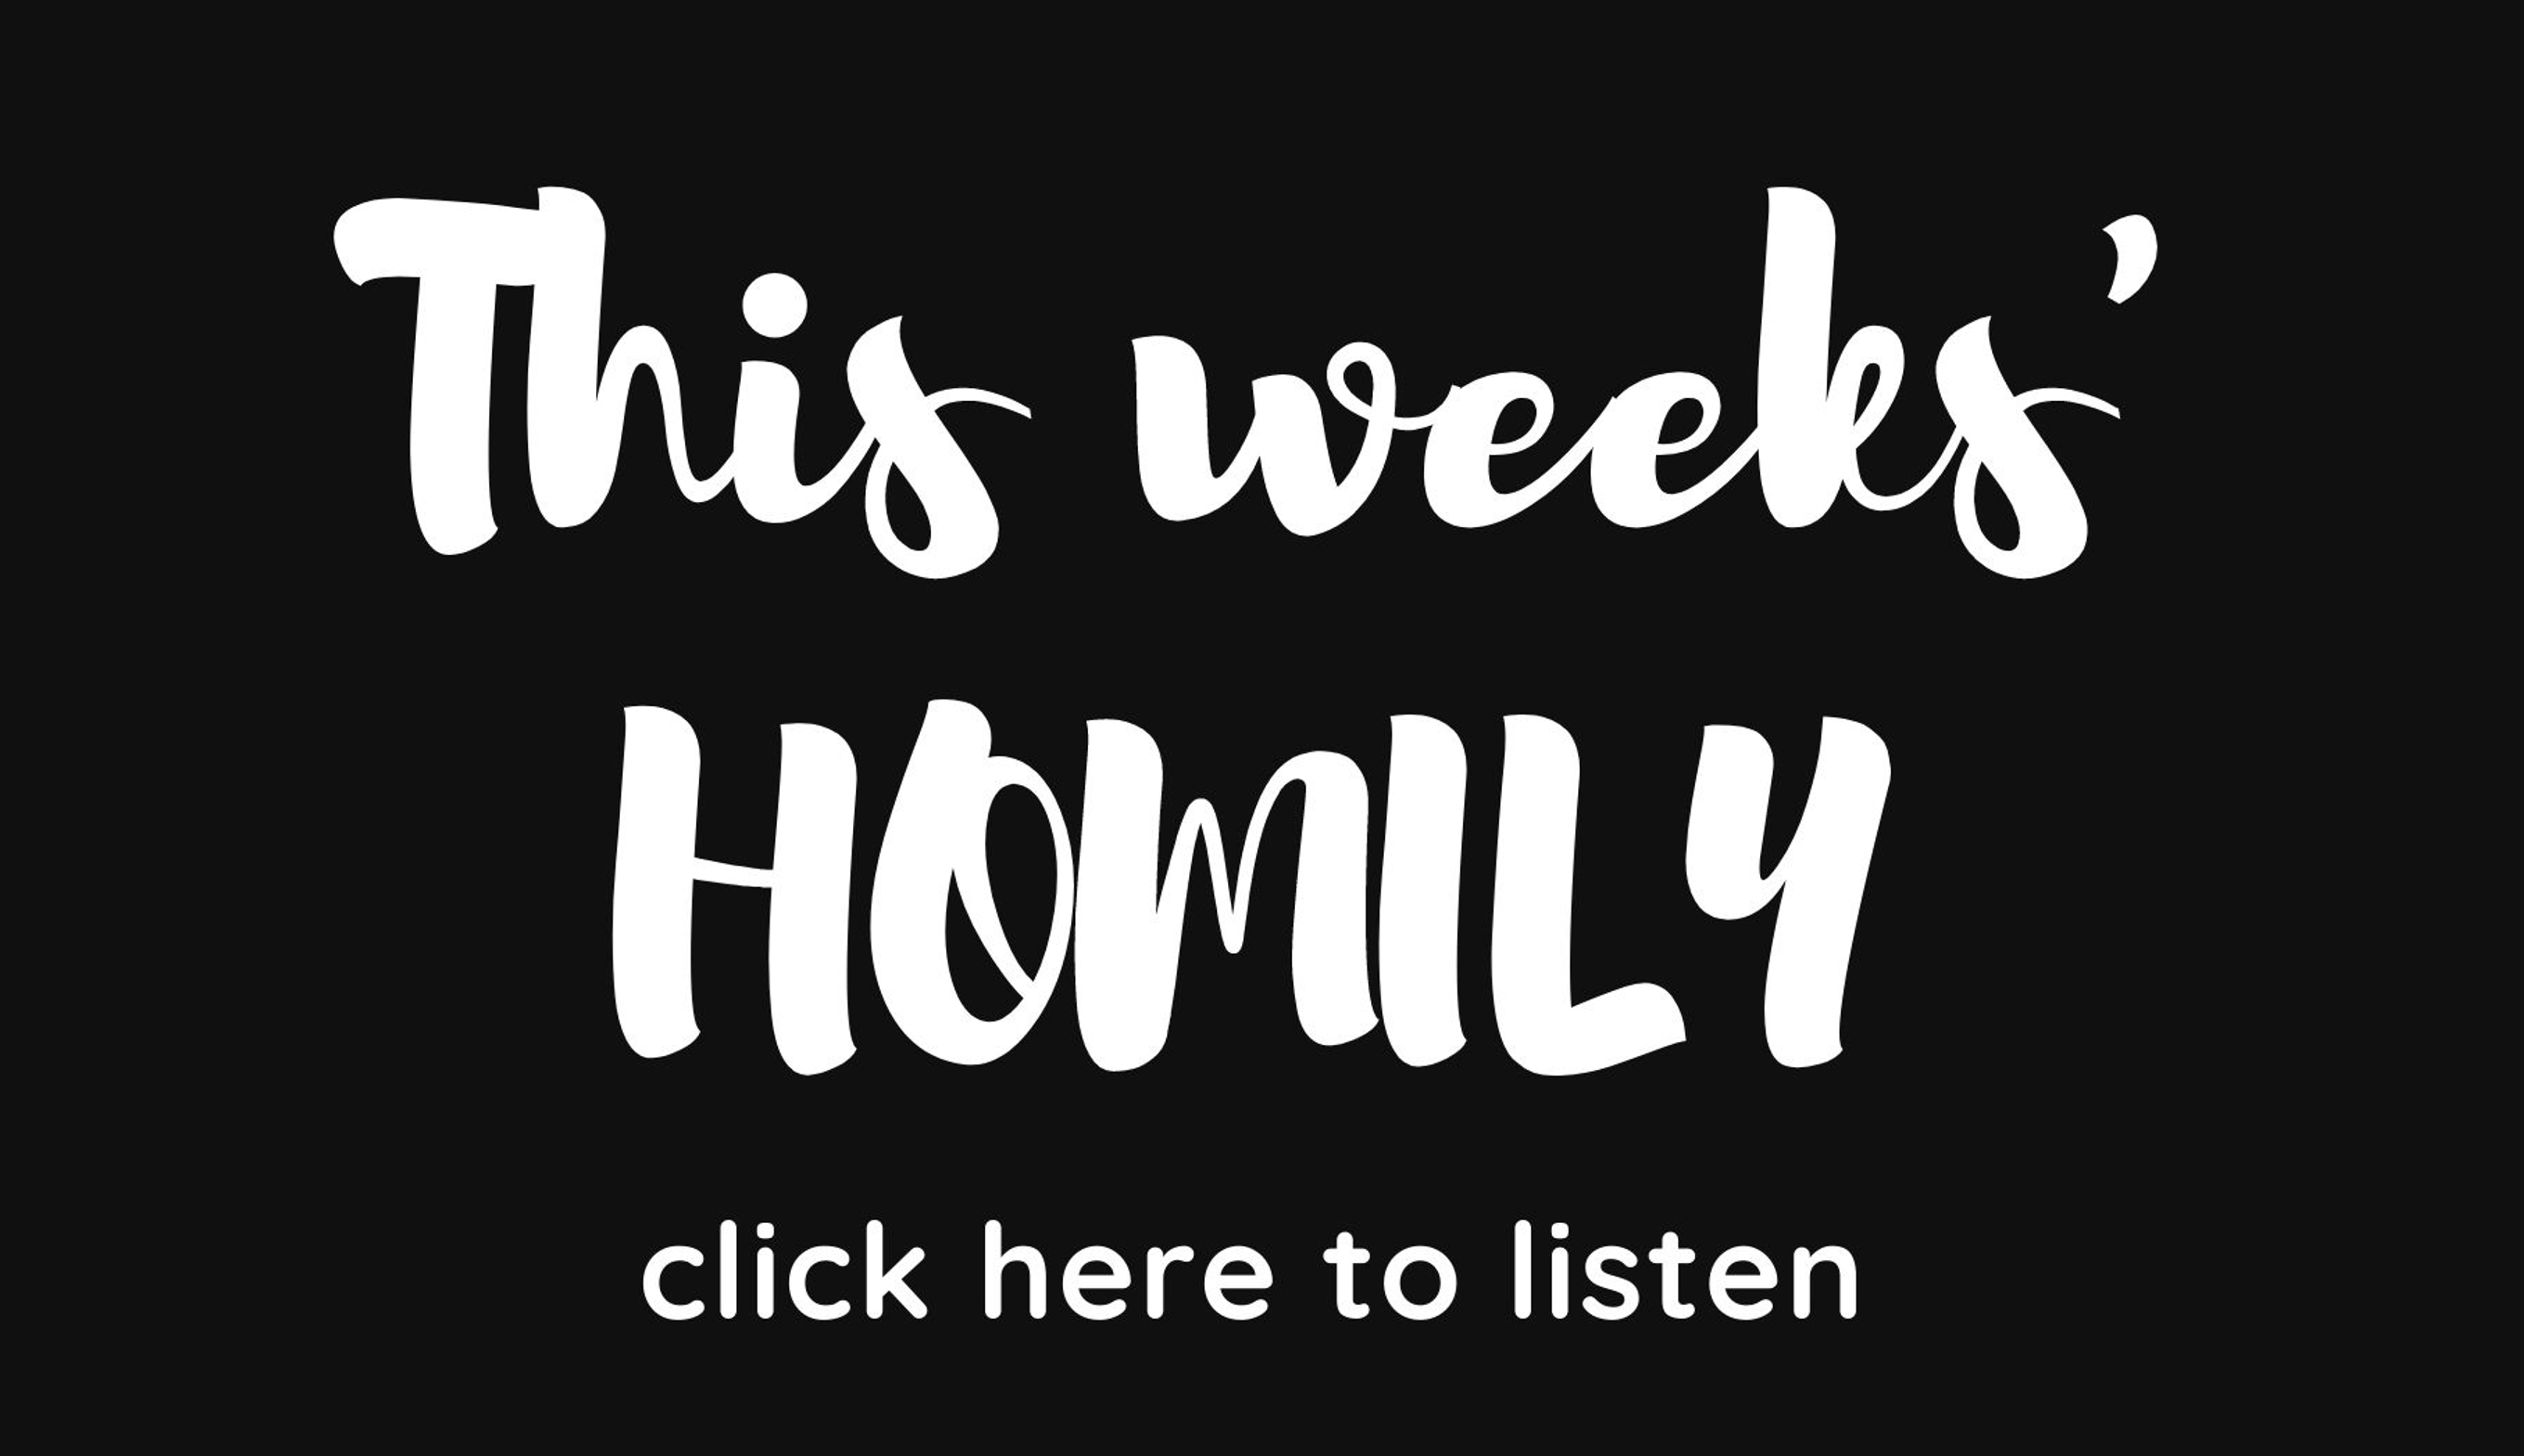 This weeks' homily here